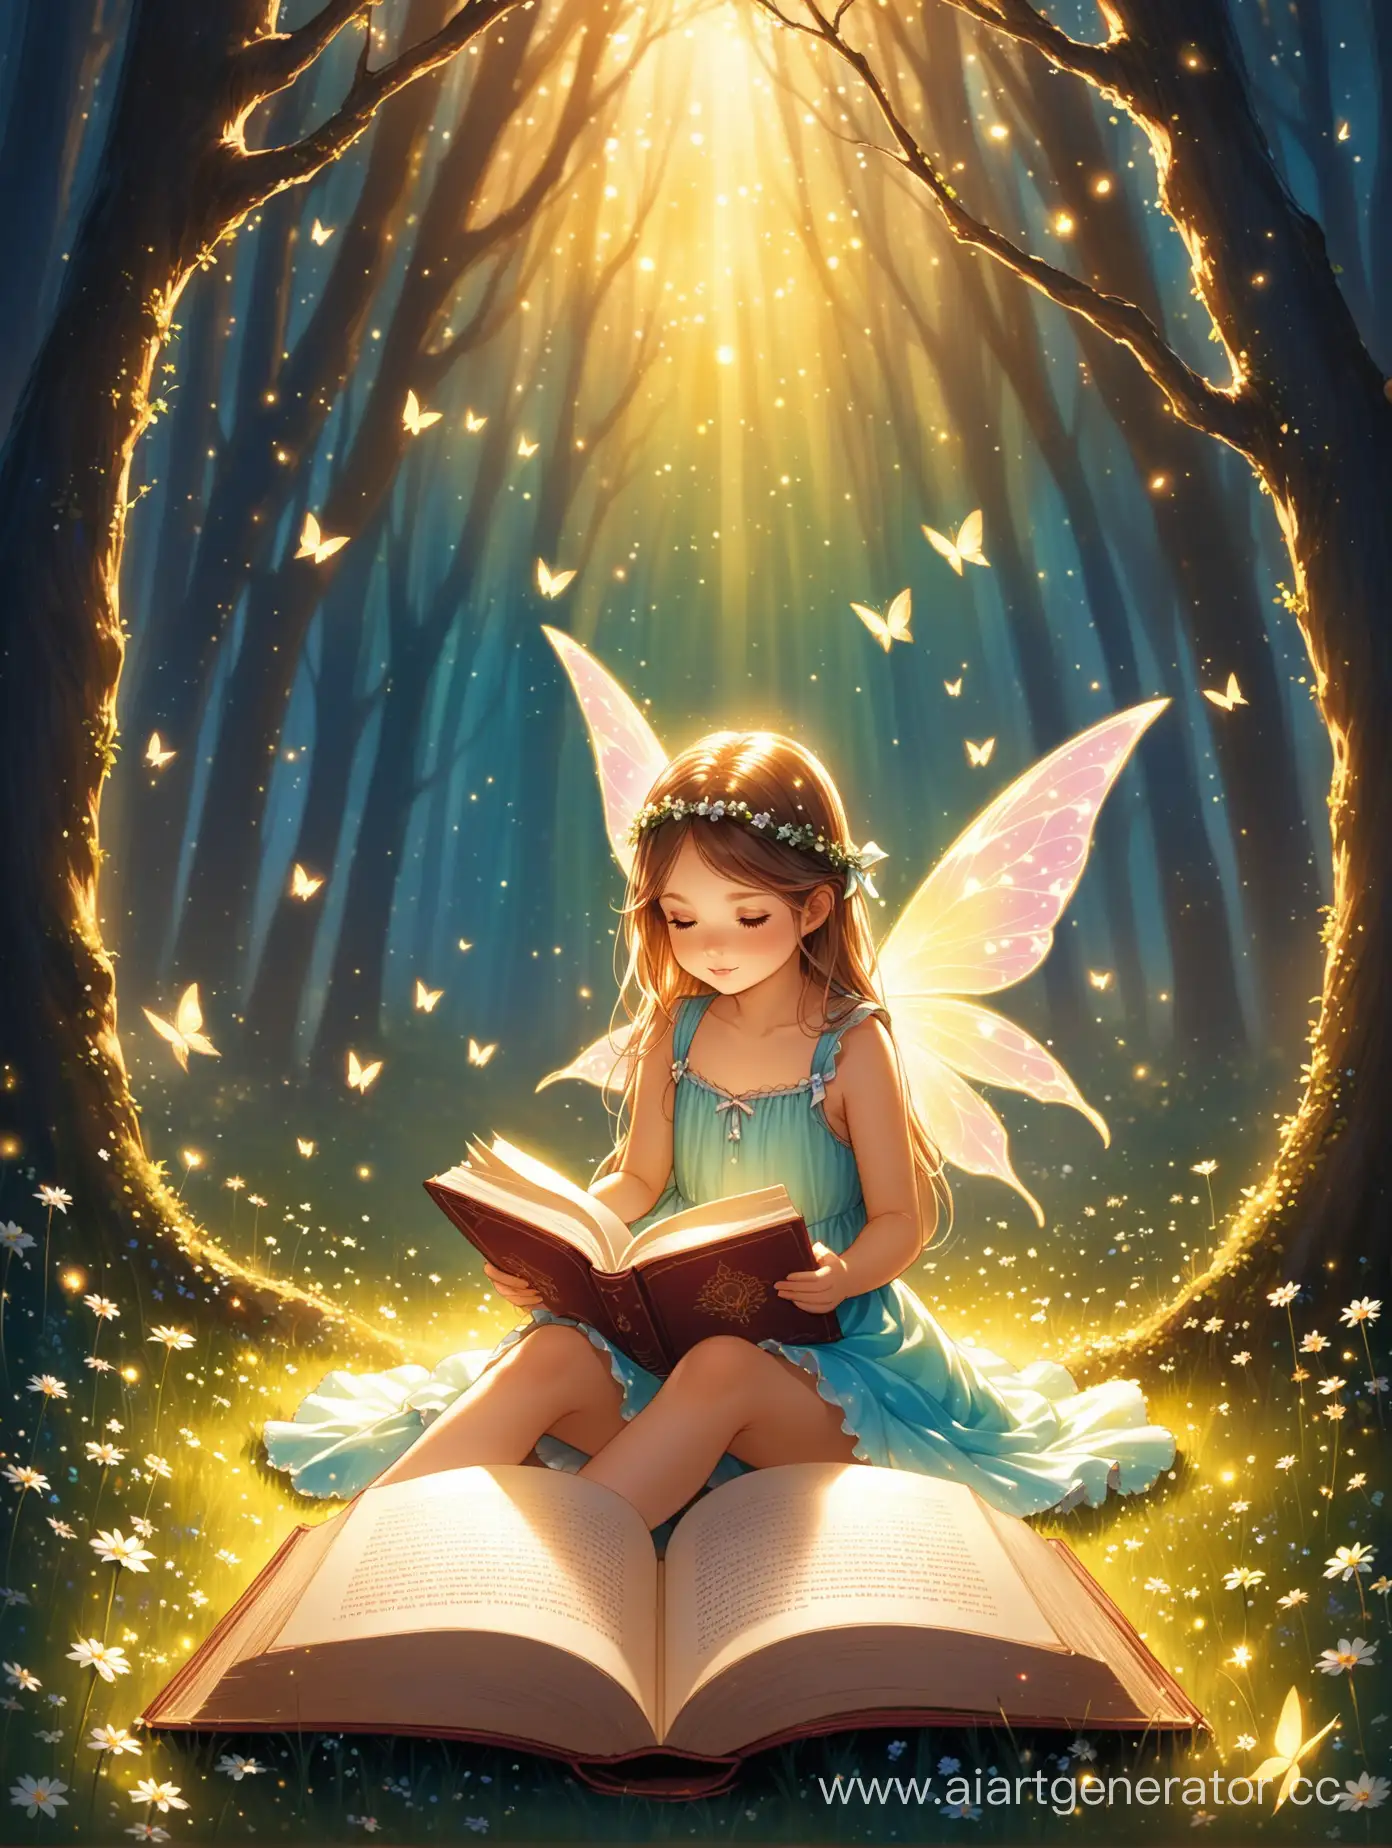 Enchanted-Little-Girl-Immersed-in-Fairy-Tale-World